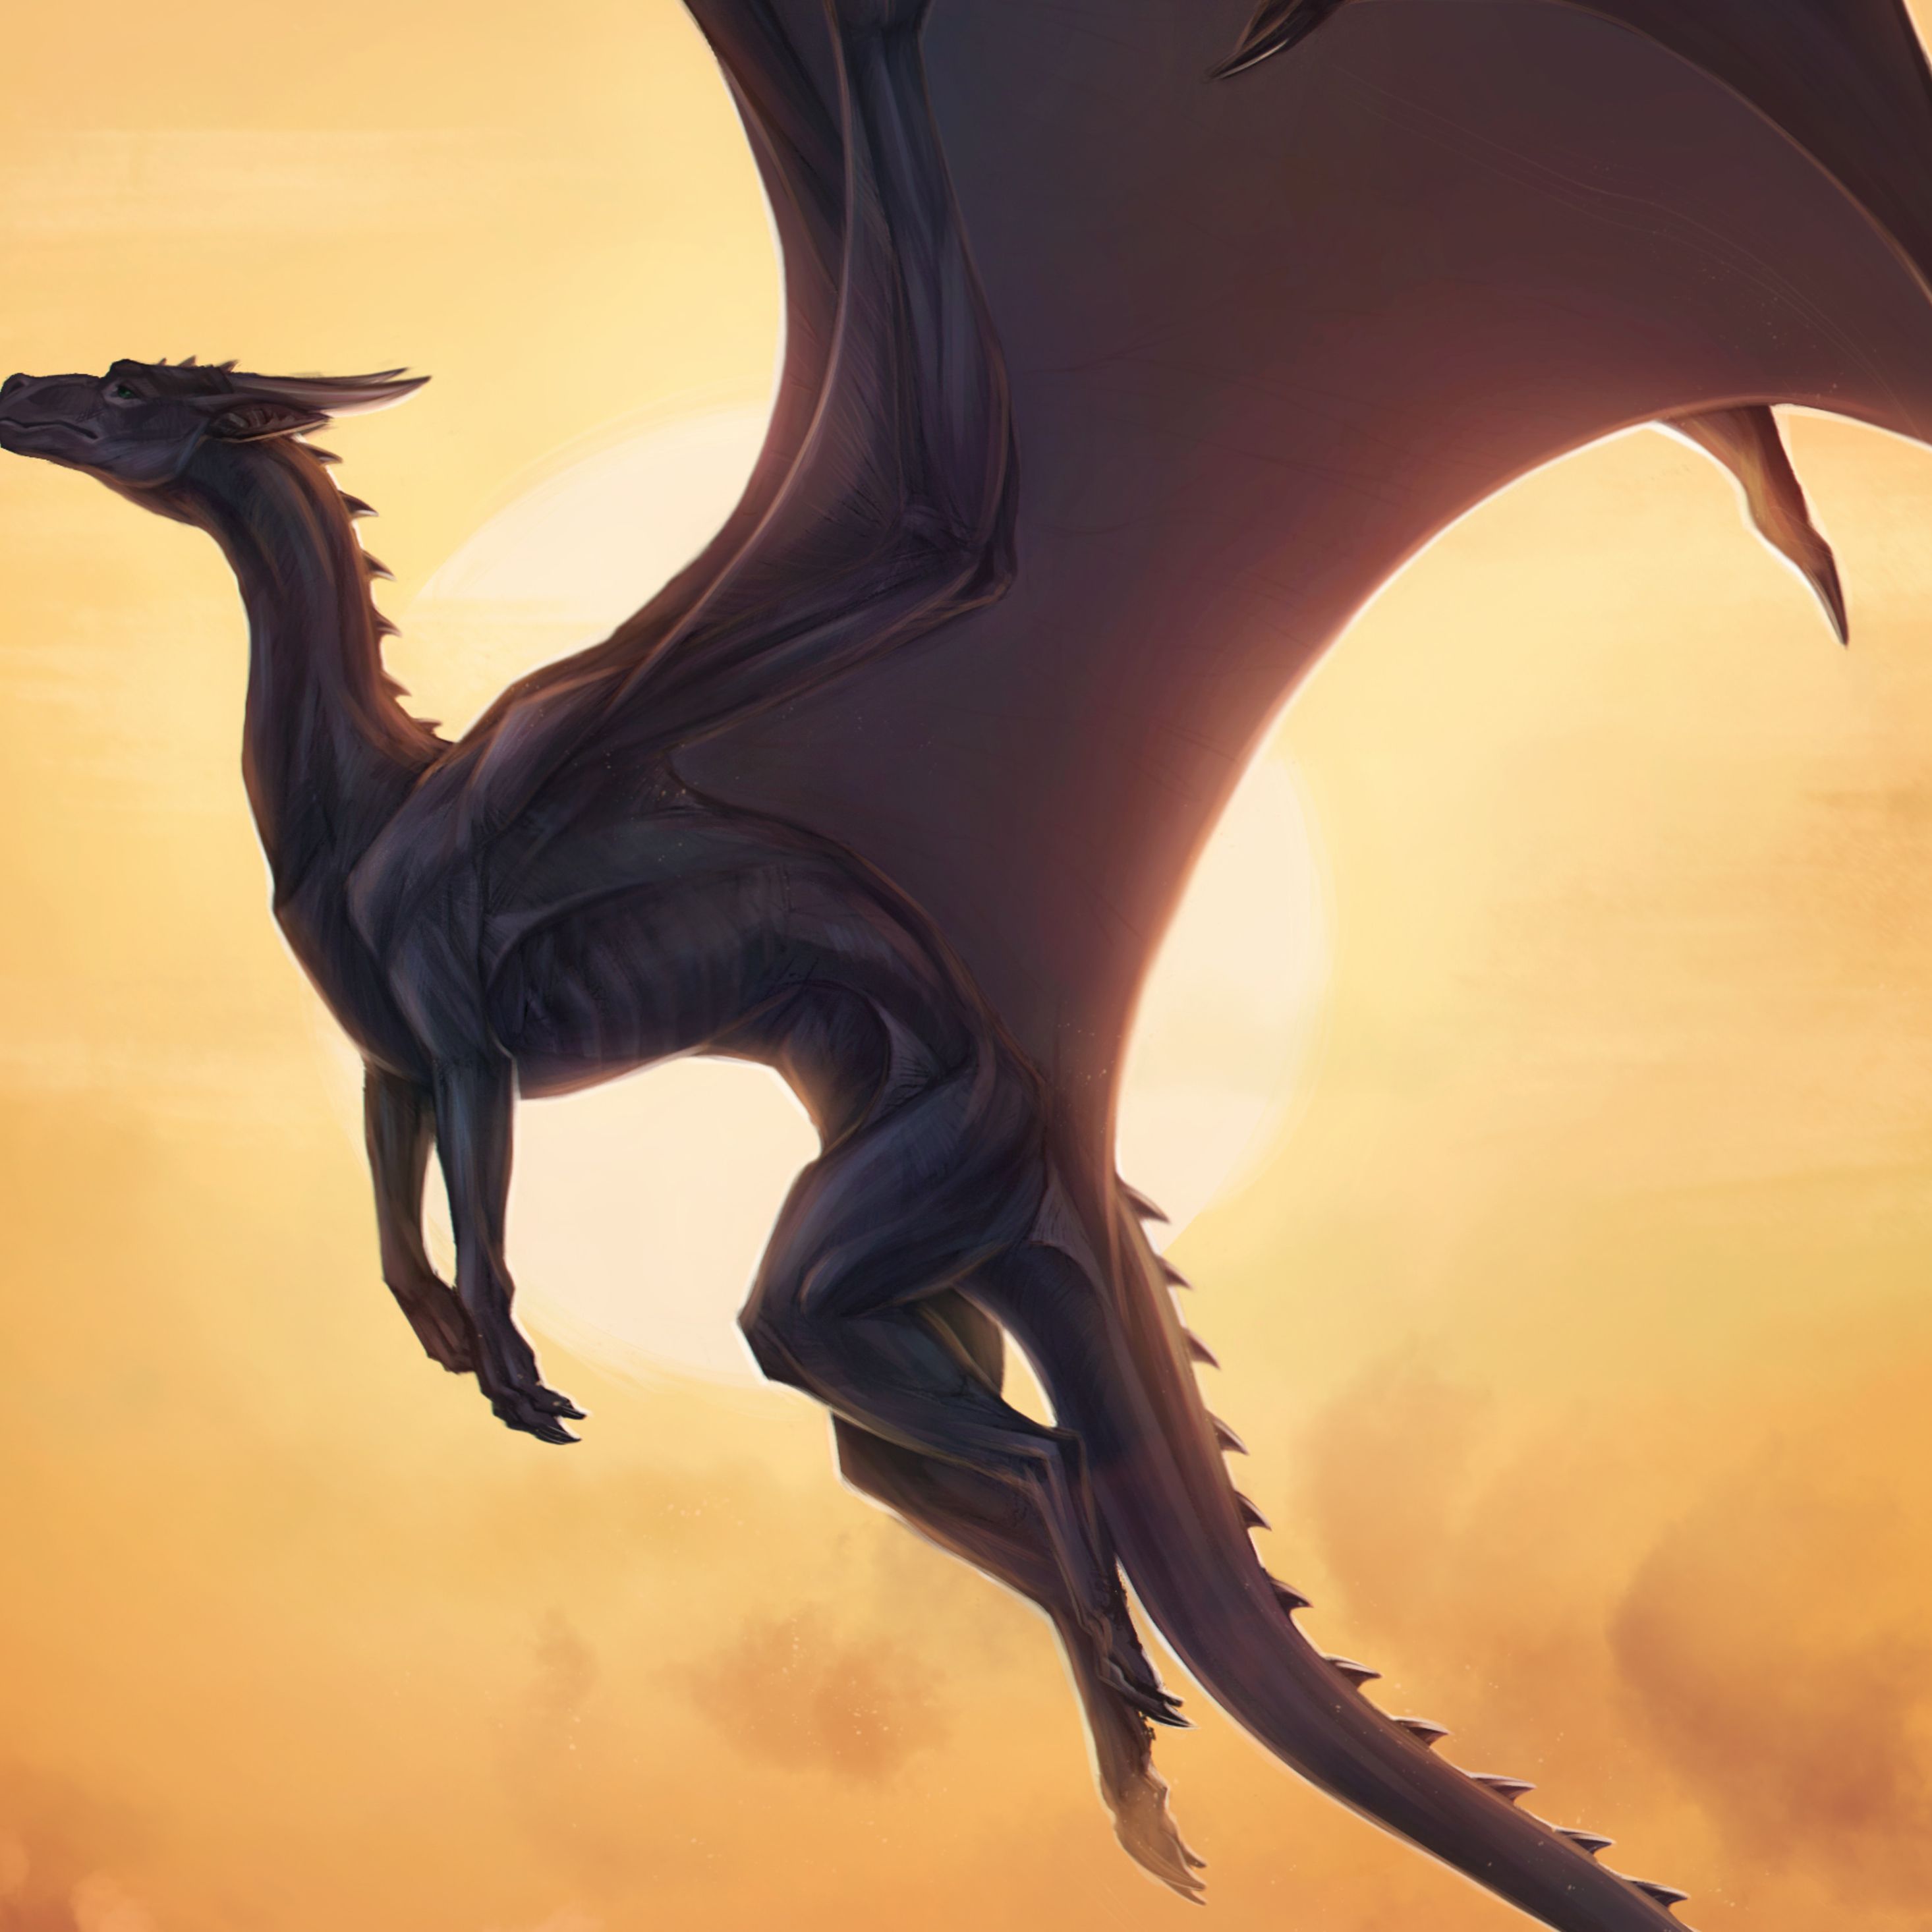 Big Dragon Opened Wings iPad Pro Retina Display HD 4k Wallpaper, Image, Background, Photo and Picture